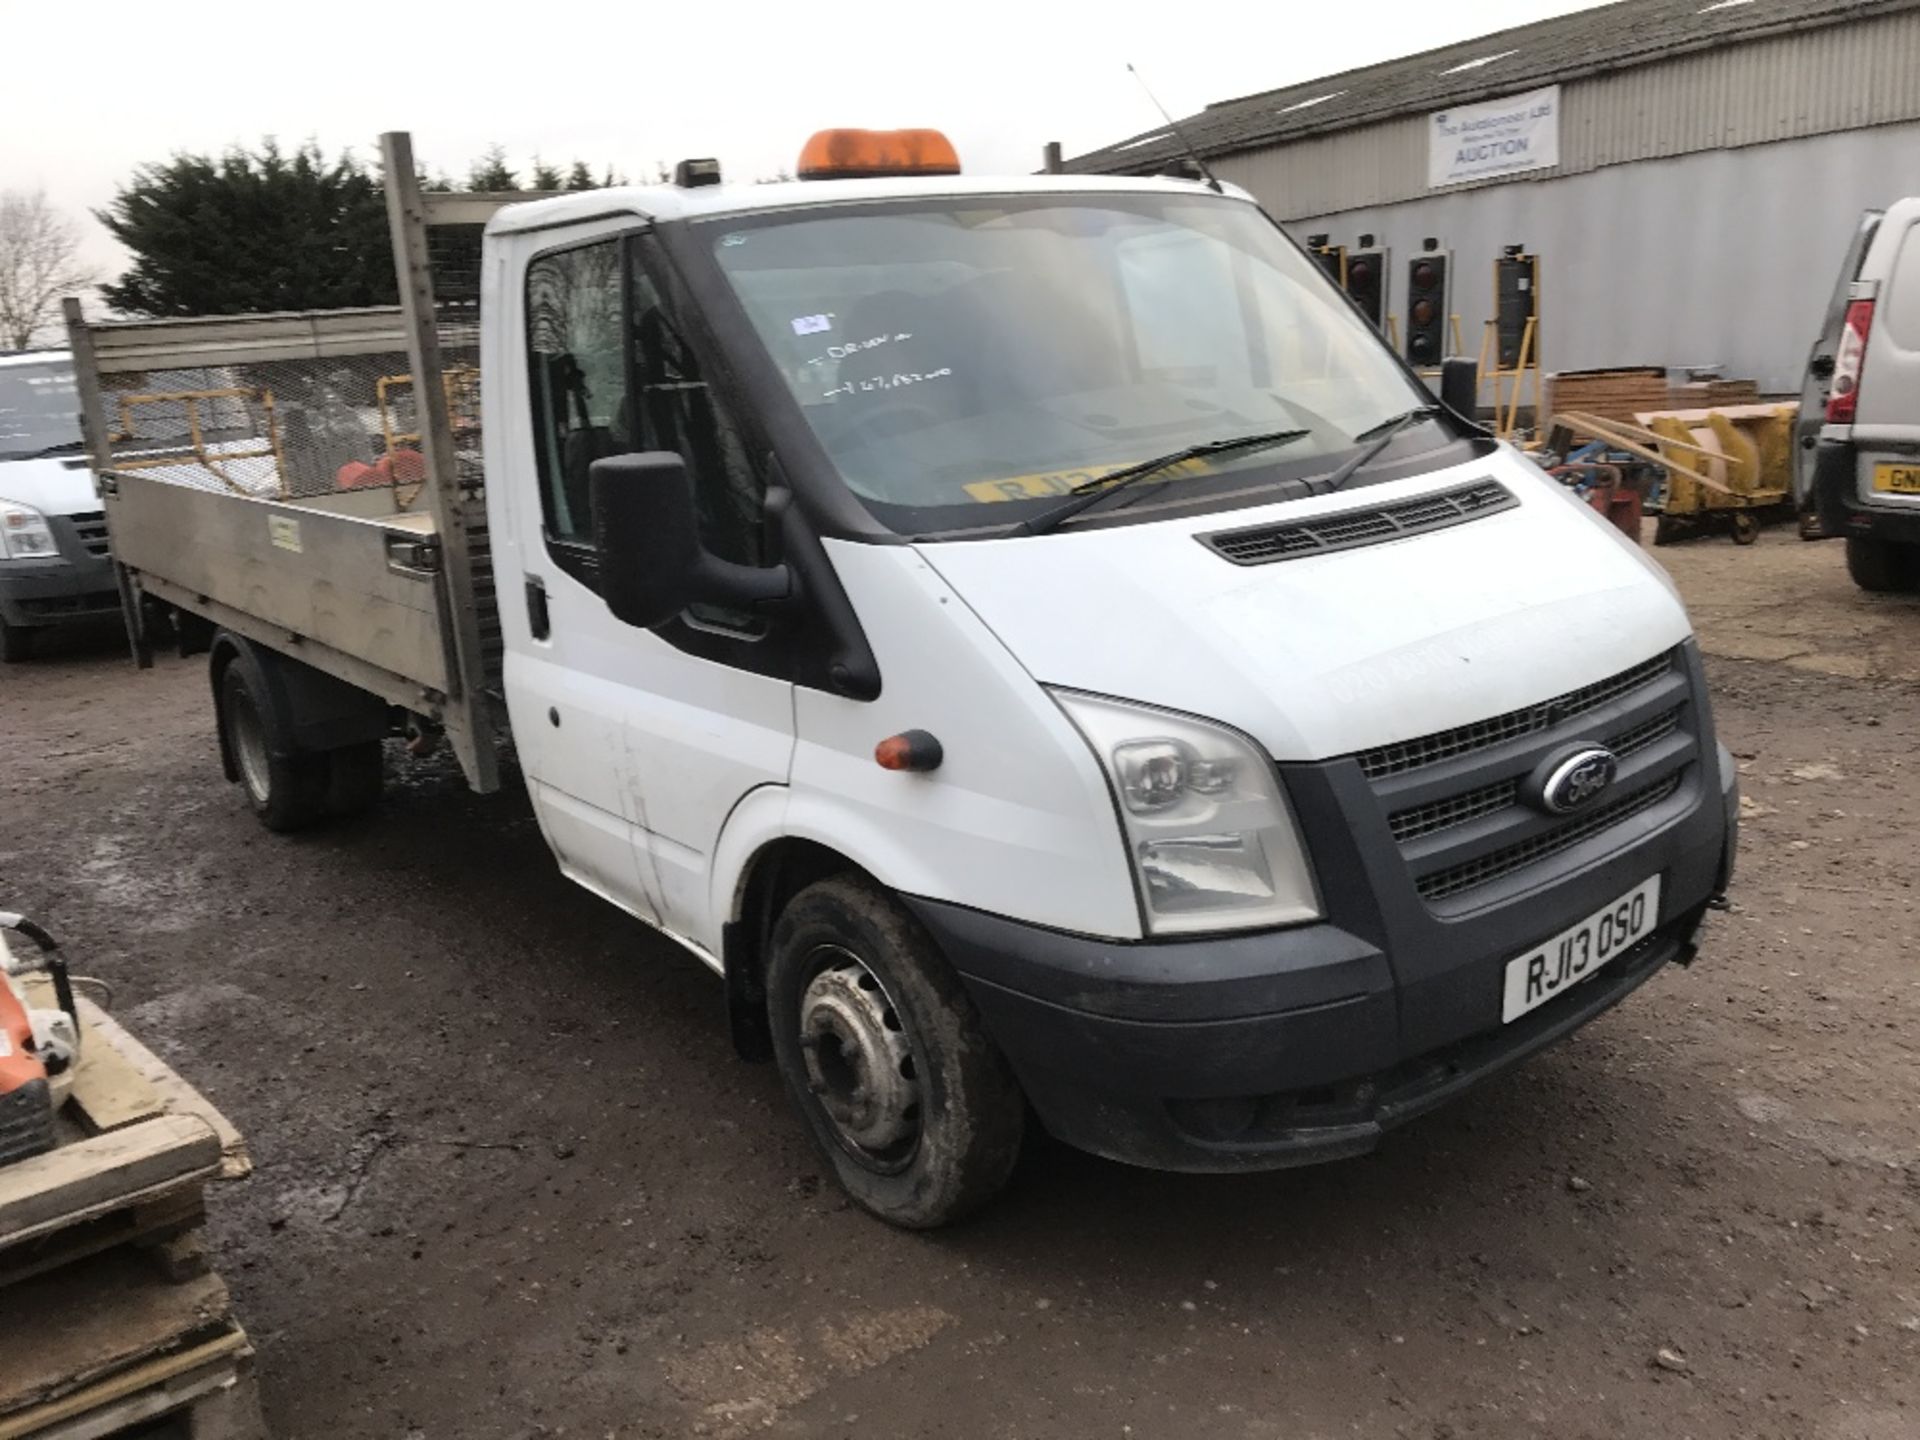 FORD TRANSIT DROP SIDE FLAT BED TRUCK WITH TAIL LIFT REG:RJ13 OSO 147,682 REC MILES. DIRECT EX